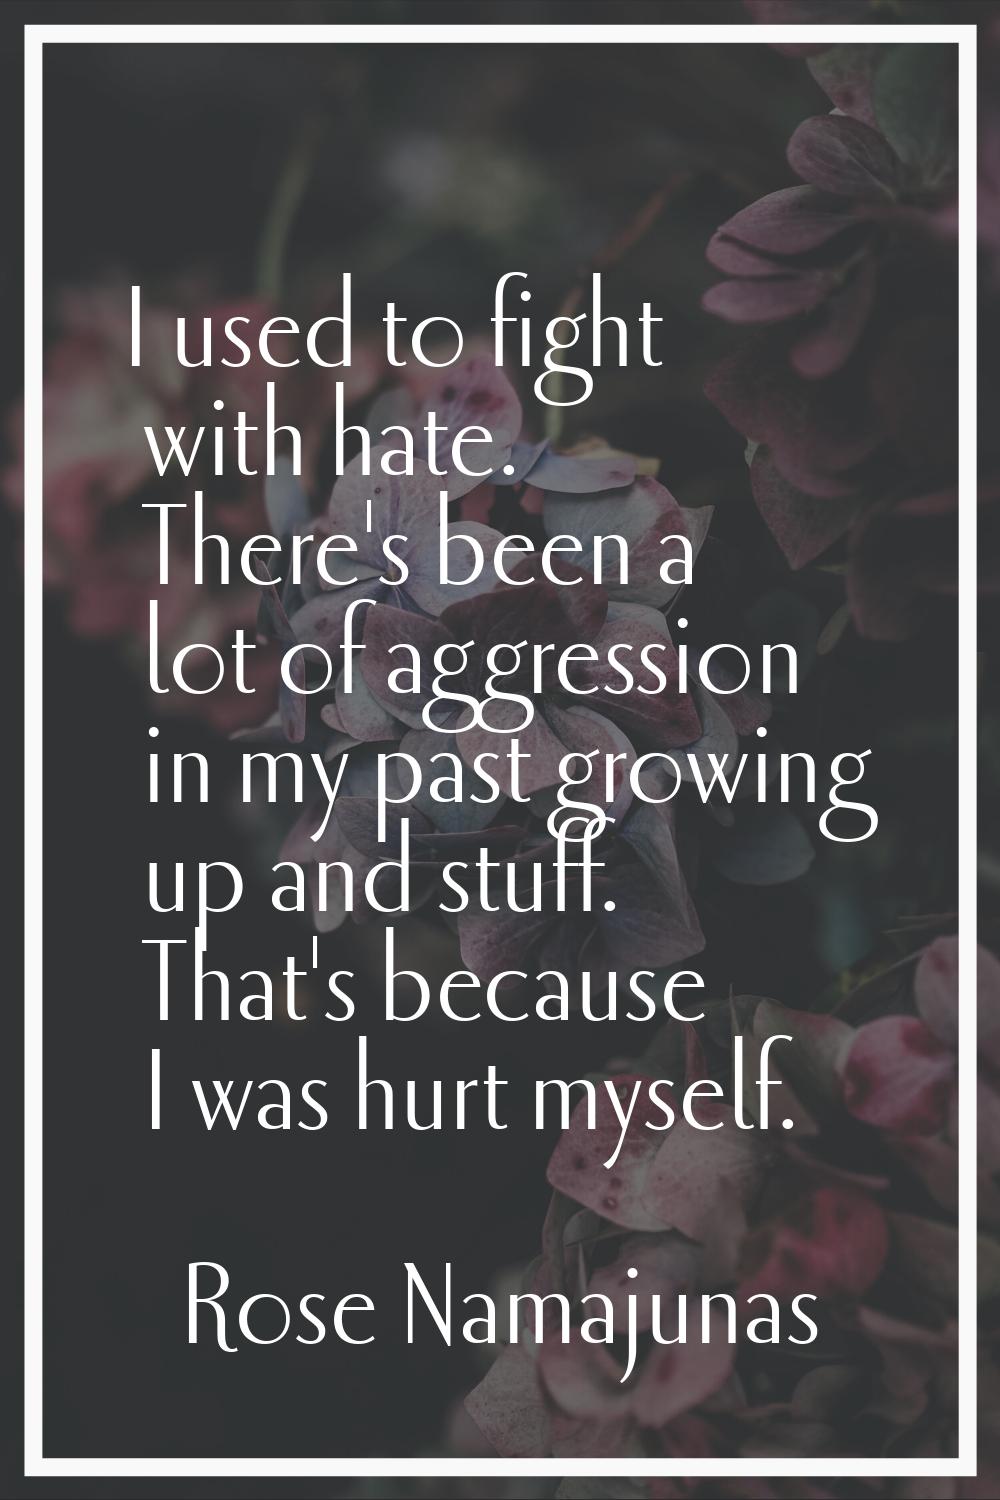 I used to fight with hate. There's been a lot of aggression in my past growing up and stuff. That's